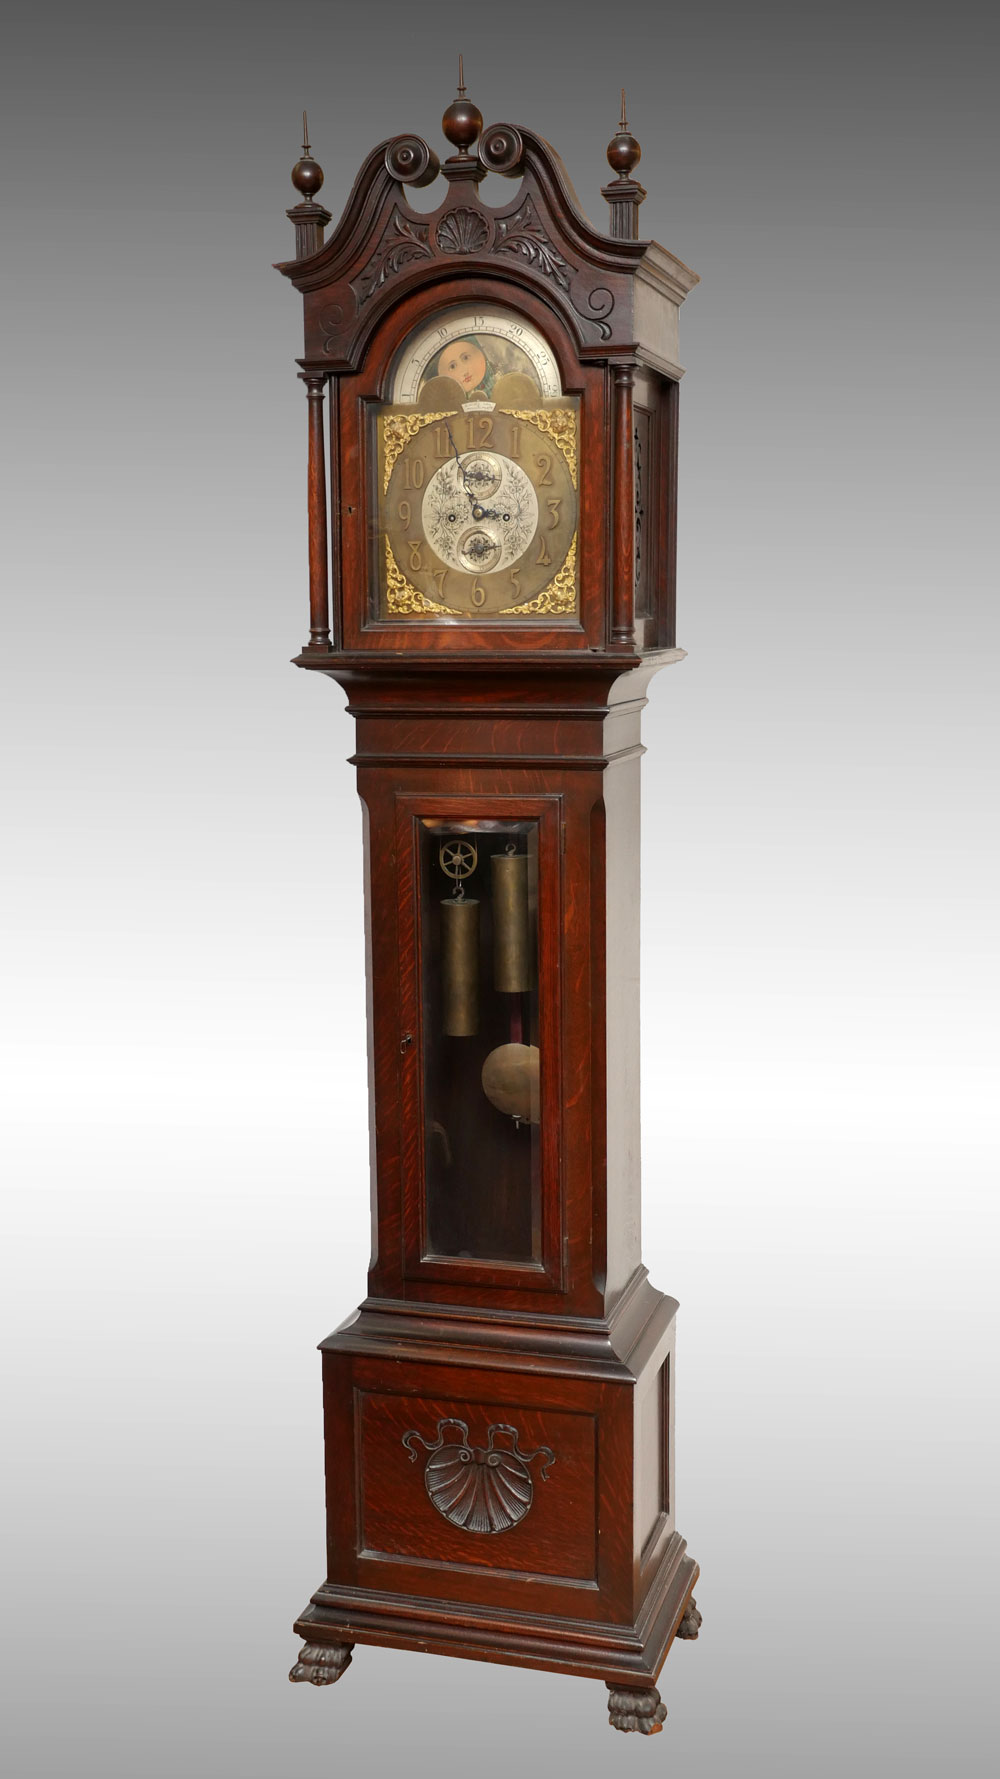 H. MUHRS SONS GRANDFATHER CLOCK: Grandfather